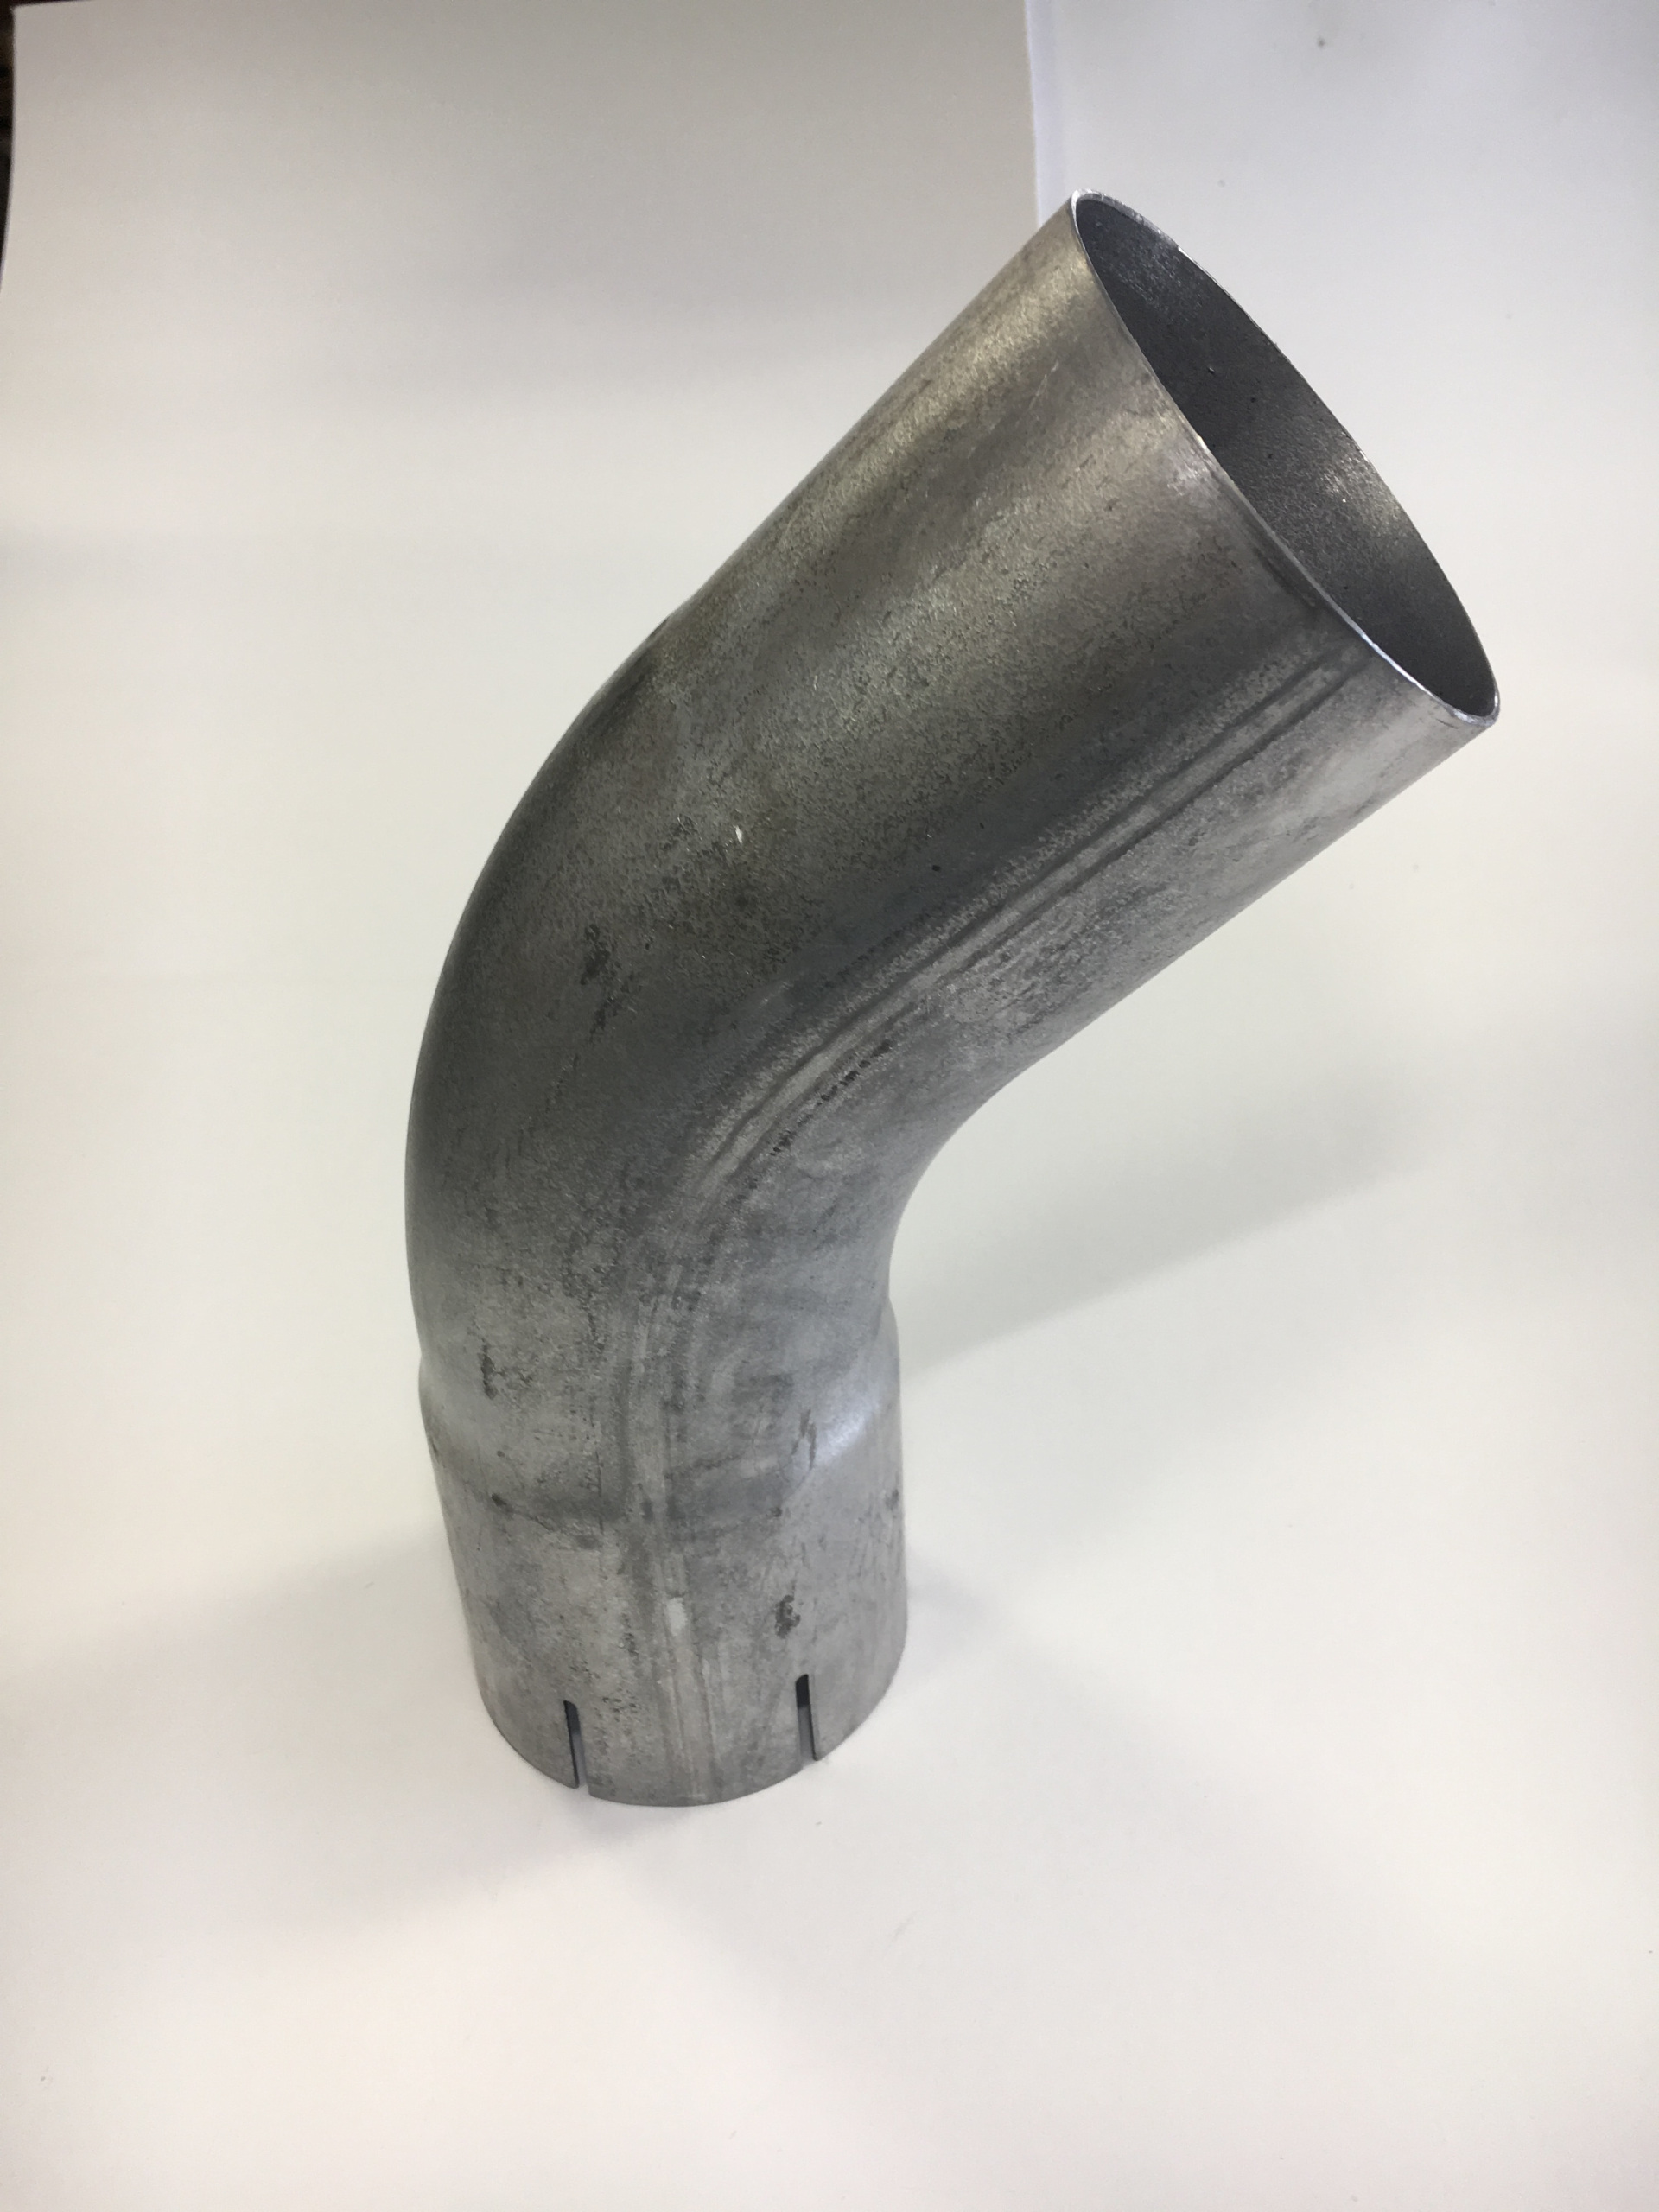 EXHAUST ELBOW 5 IN. 89075A - AVAILABILITY: NORMALLY STOCKED ITEM